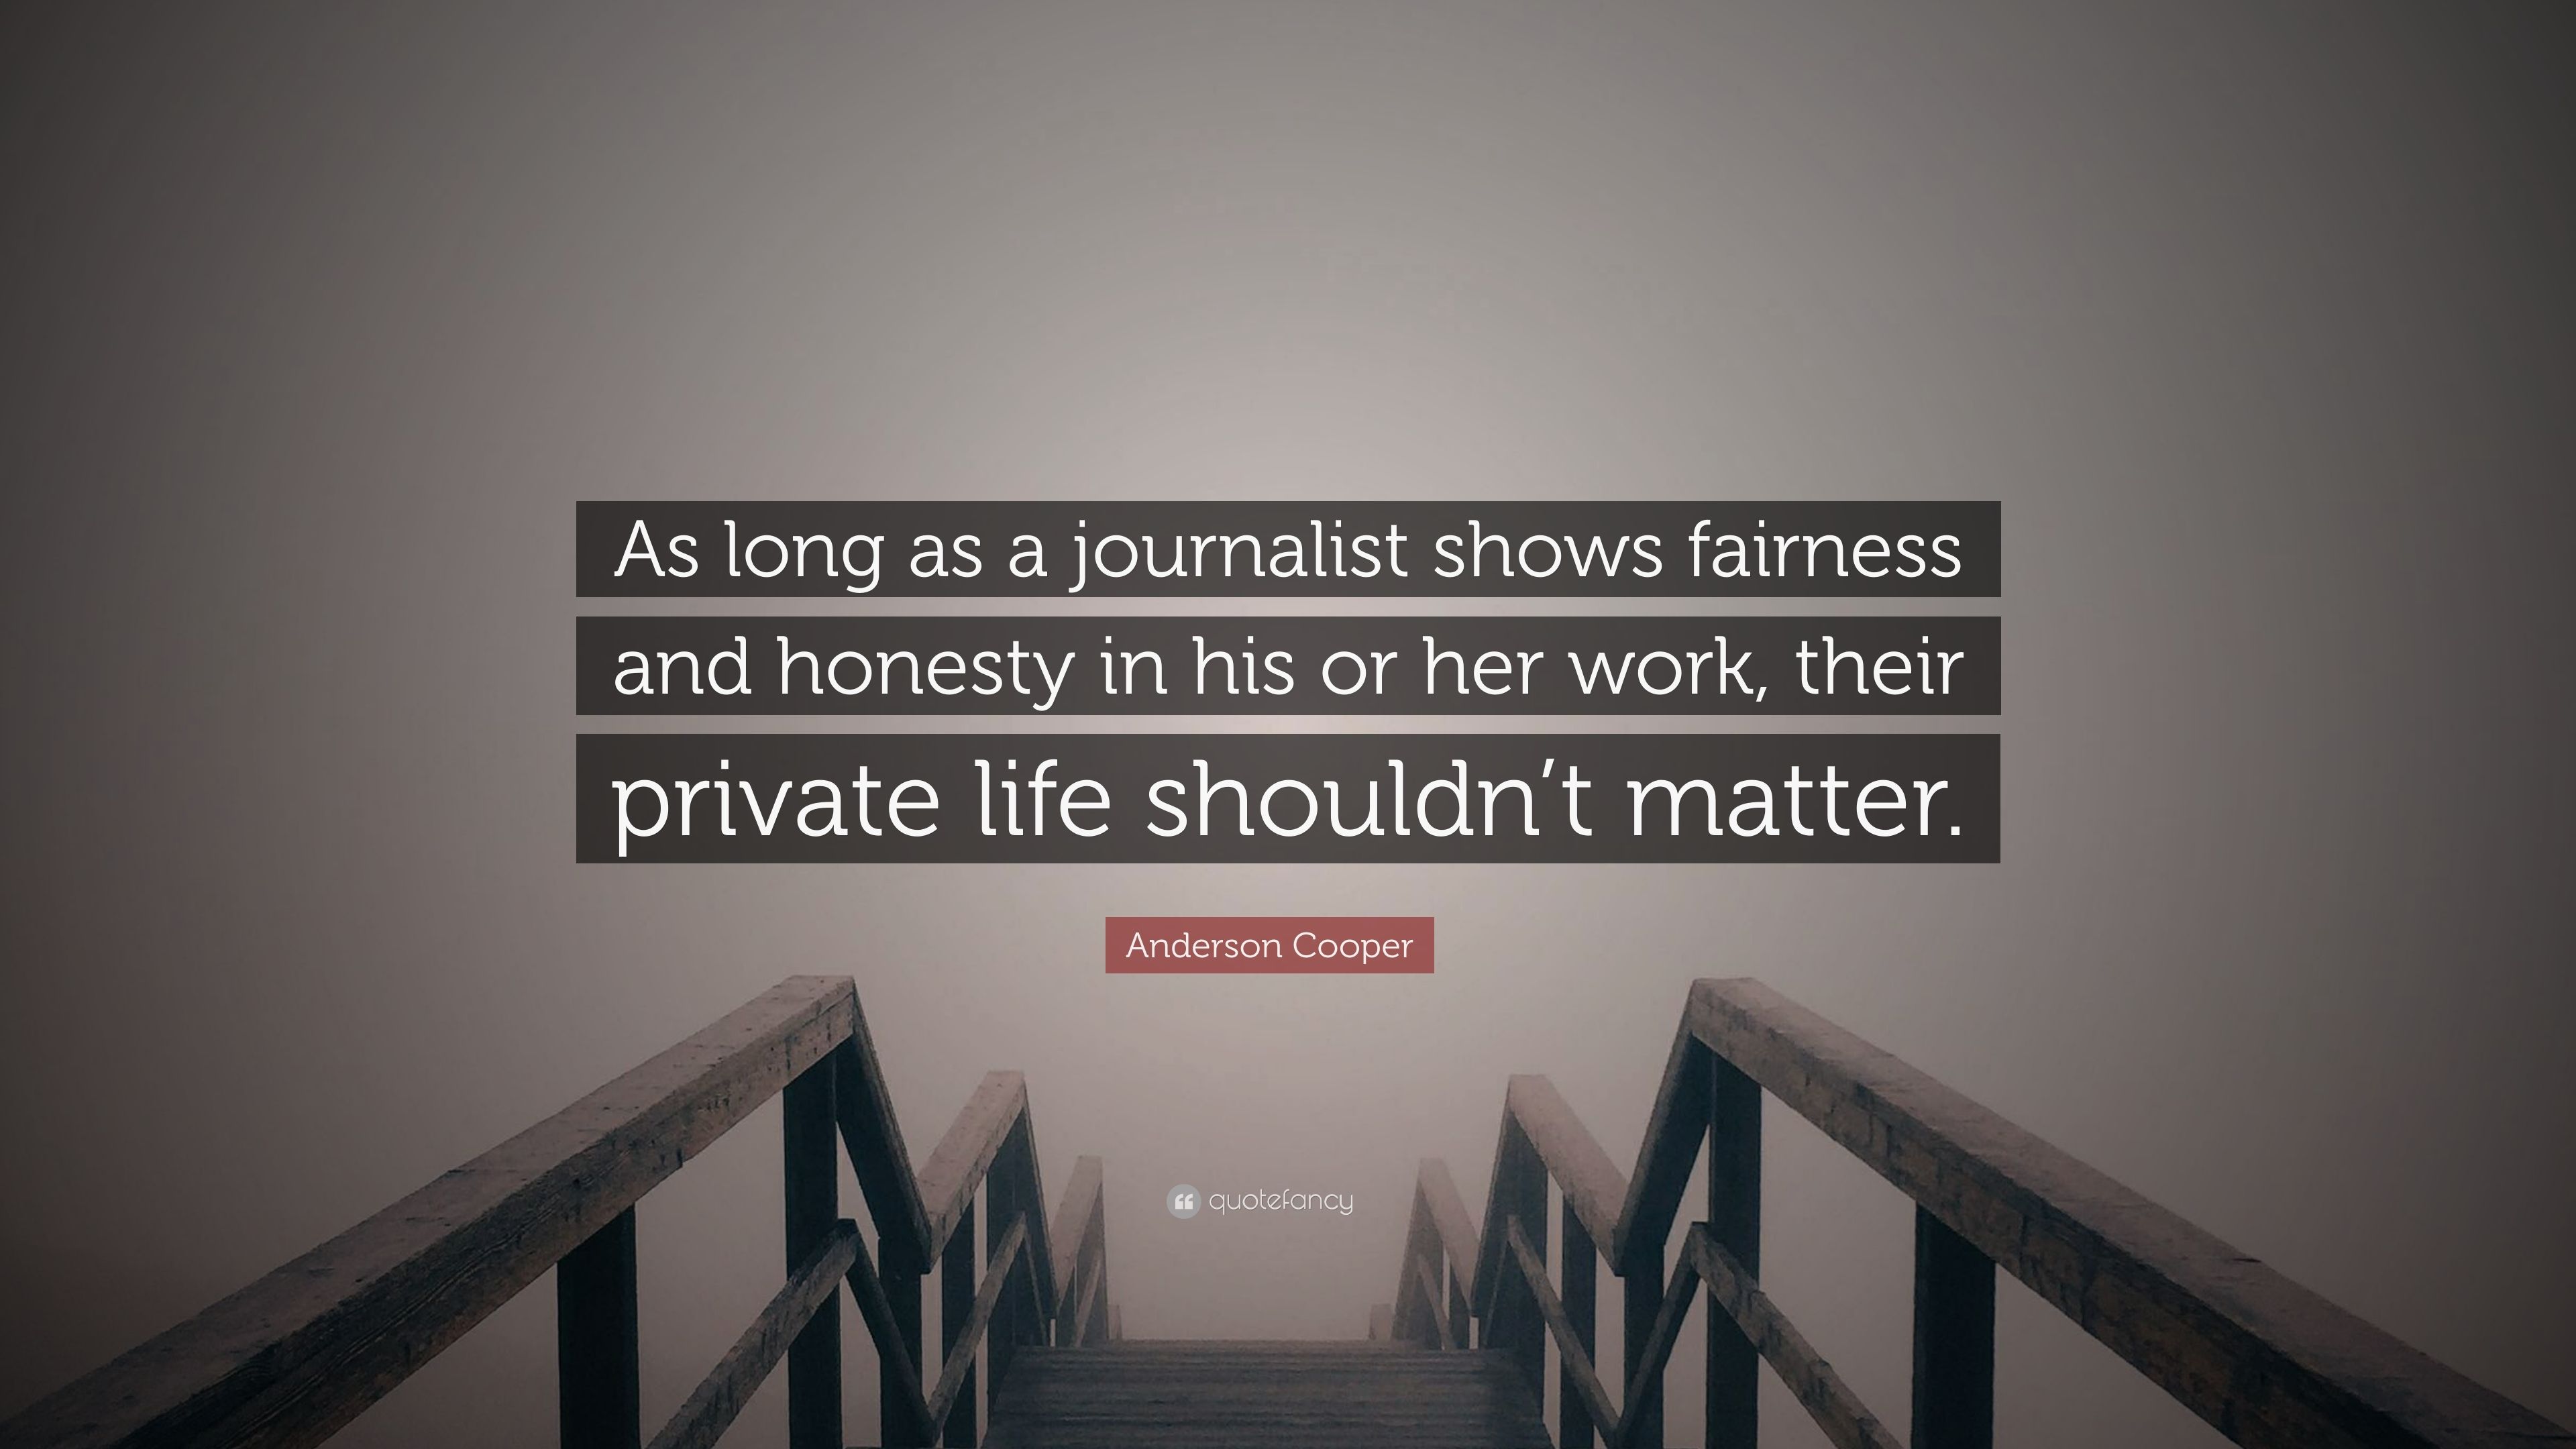 Anderson Cooper Quote: “As long as a journalist shows fairness